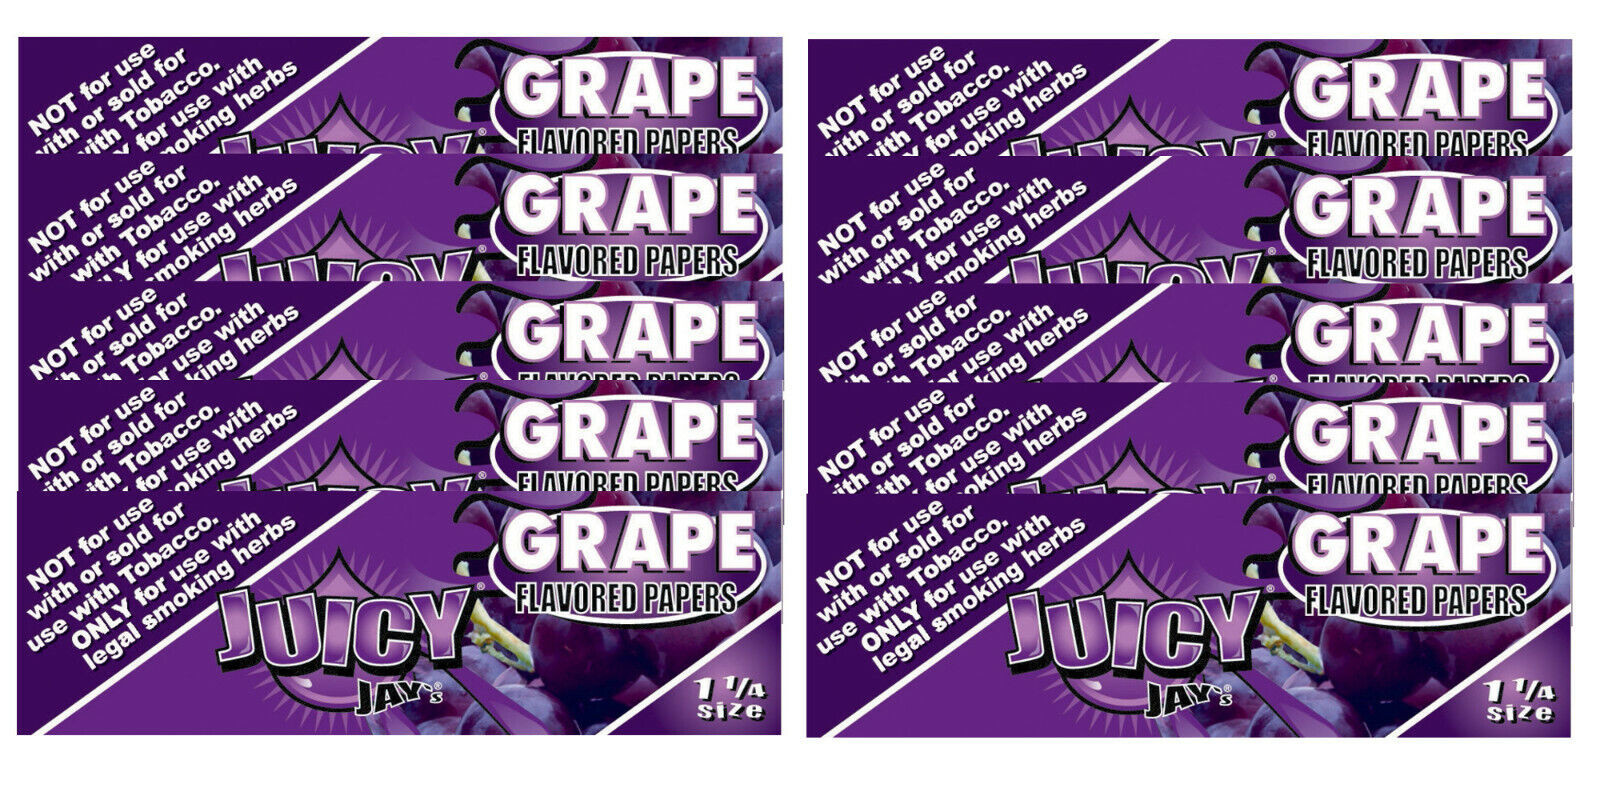 Juicy Jay's Grape Flavored Rolling Papers 1.25 10 Packs